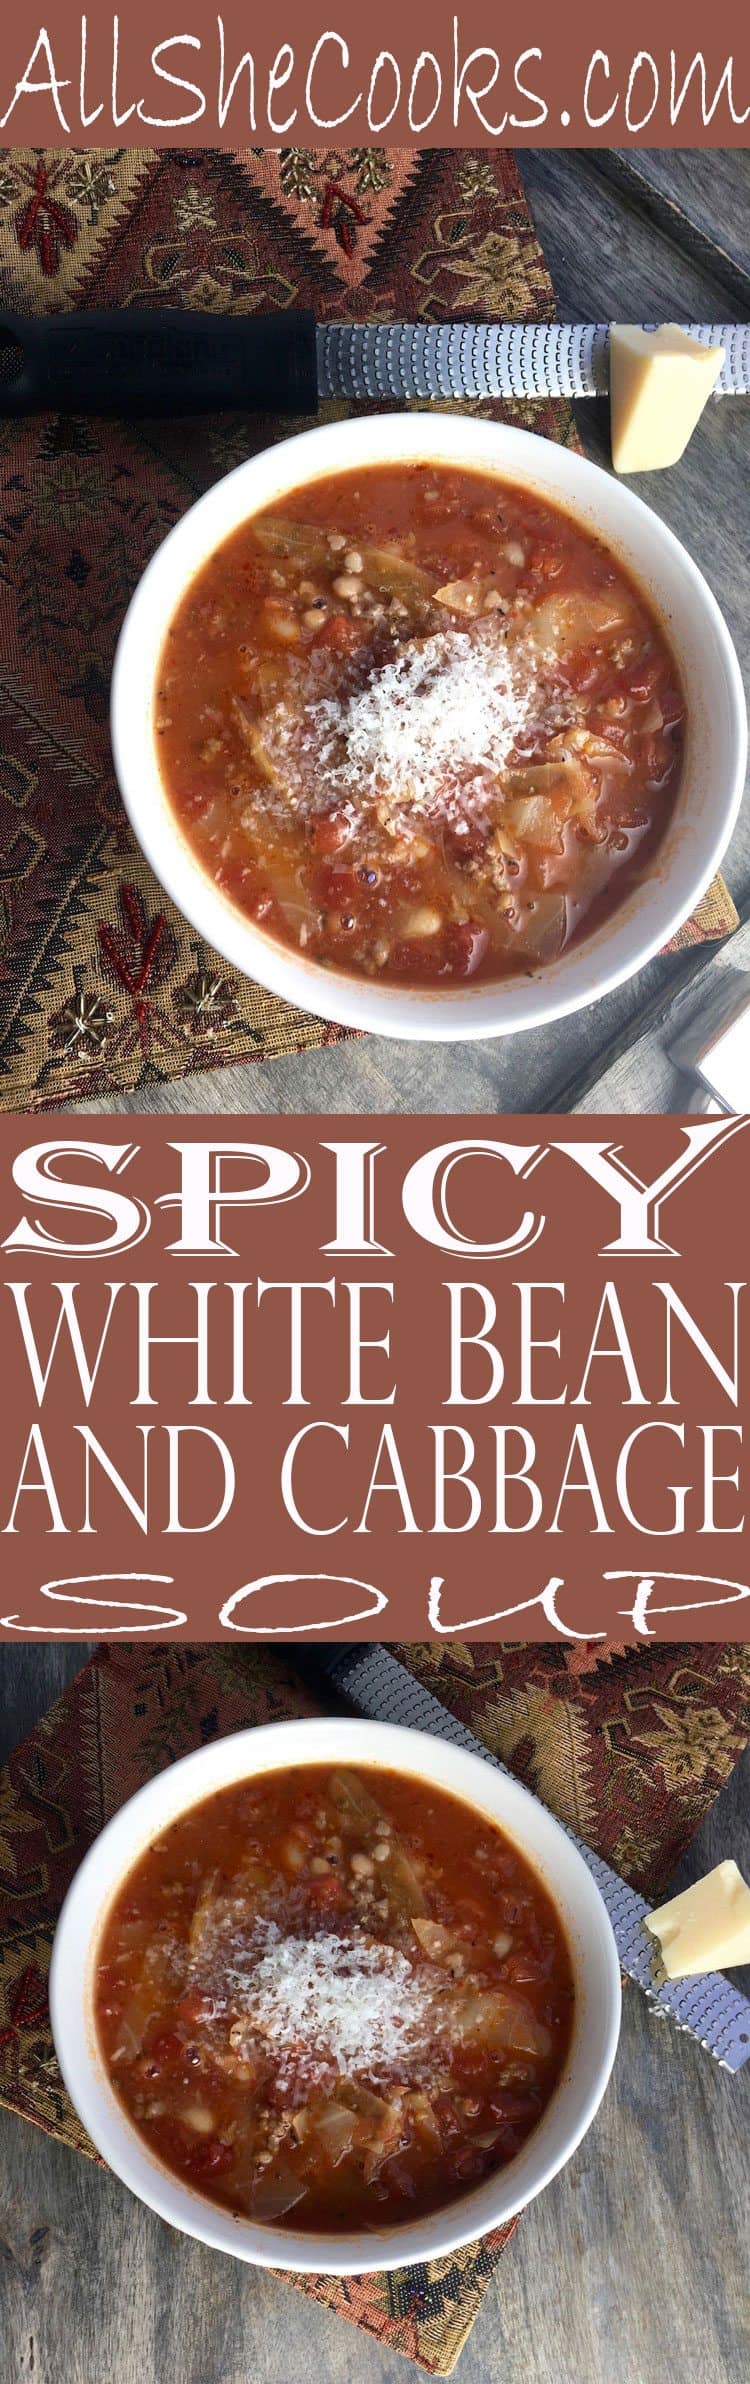 White Bean and Cabbage Soup weight loss soup. Delicious soup recipe with plenty of filling ingredients that make eating healthy easy.